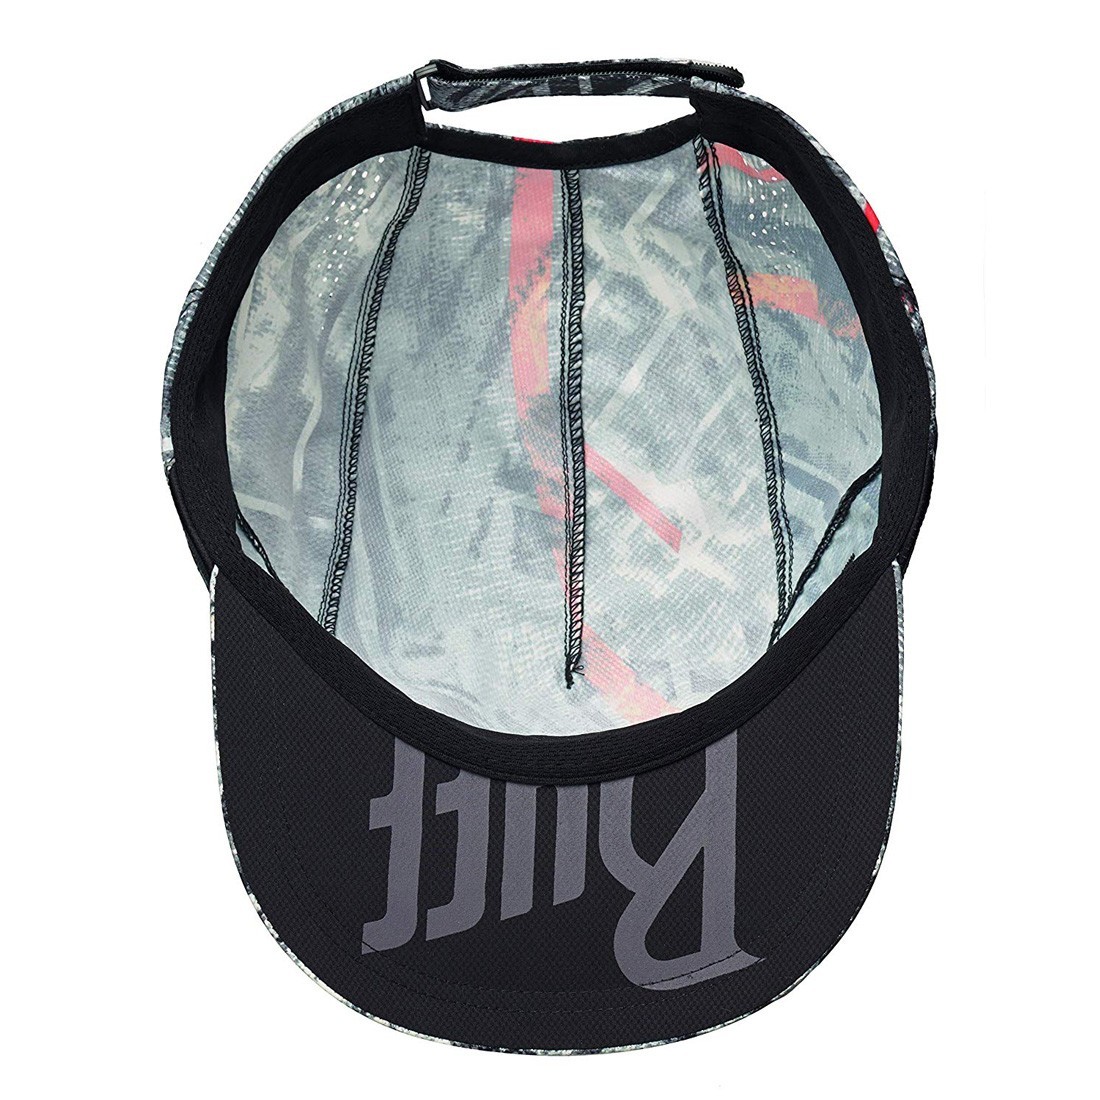 Shop Buff Pro Run Cap R-City Jungle Grey - Buff, delivered to your home |  The Outfit